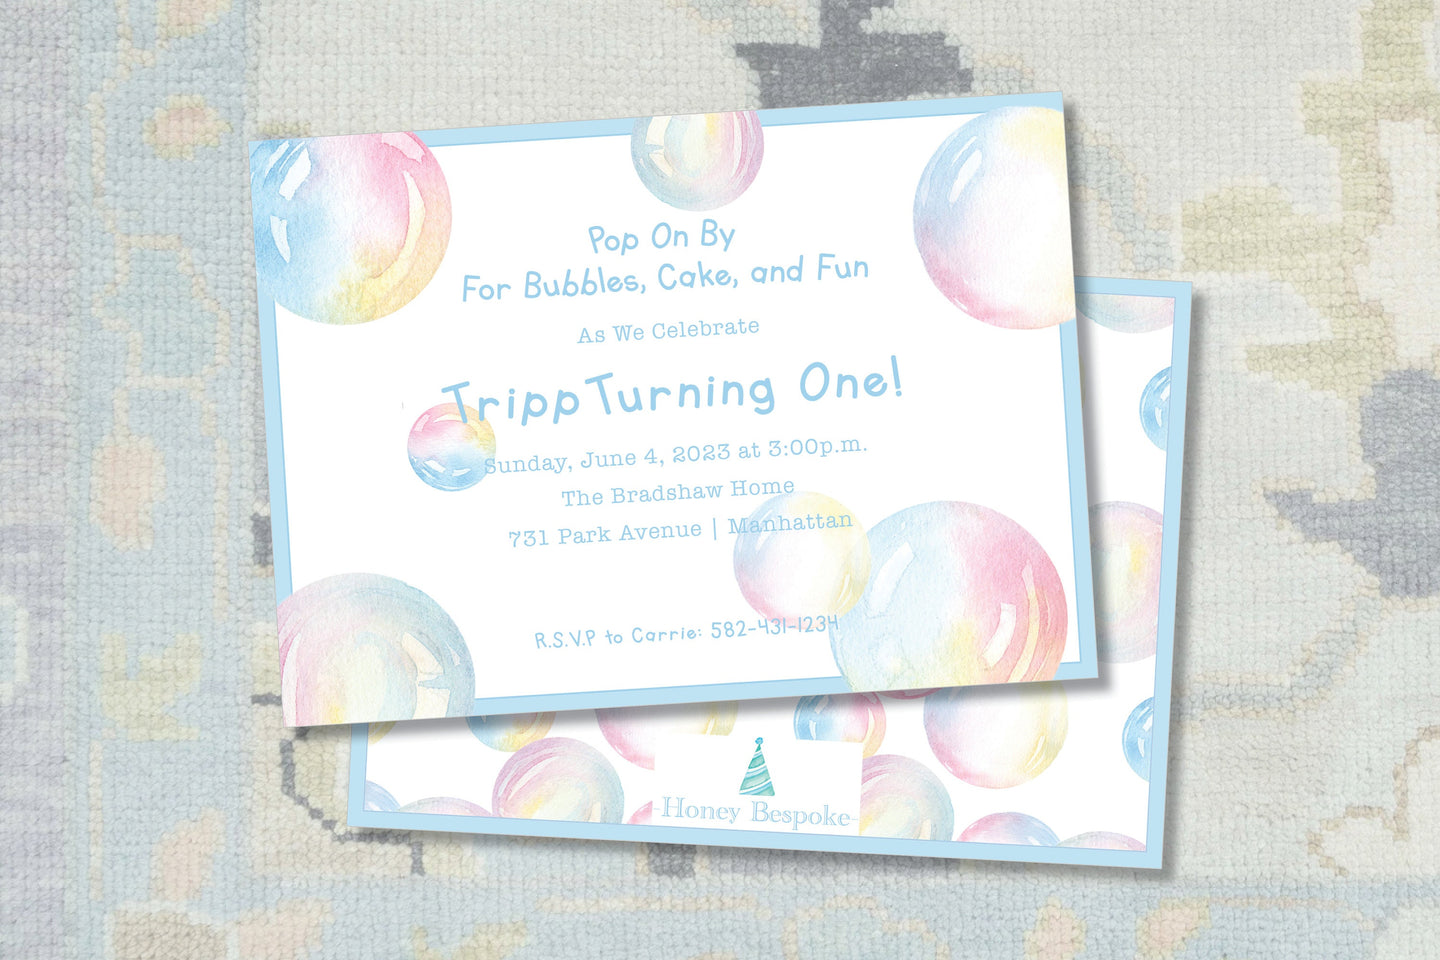 Bubble Party Birthday Invitation / Pop On By / Pop On Over / Bubble Birthday Party / Bubble Boys Birthday